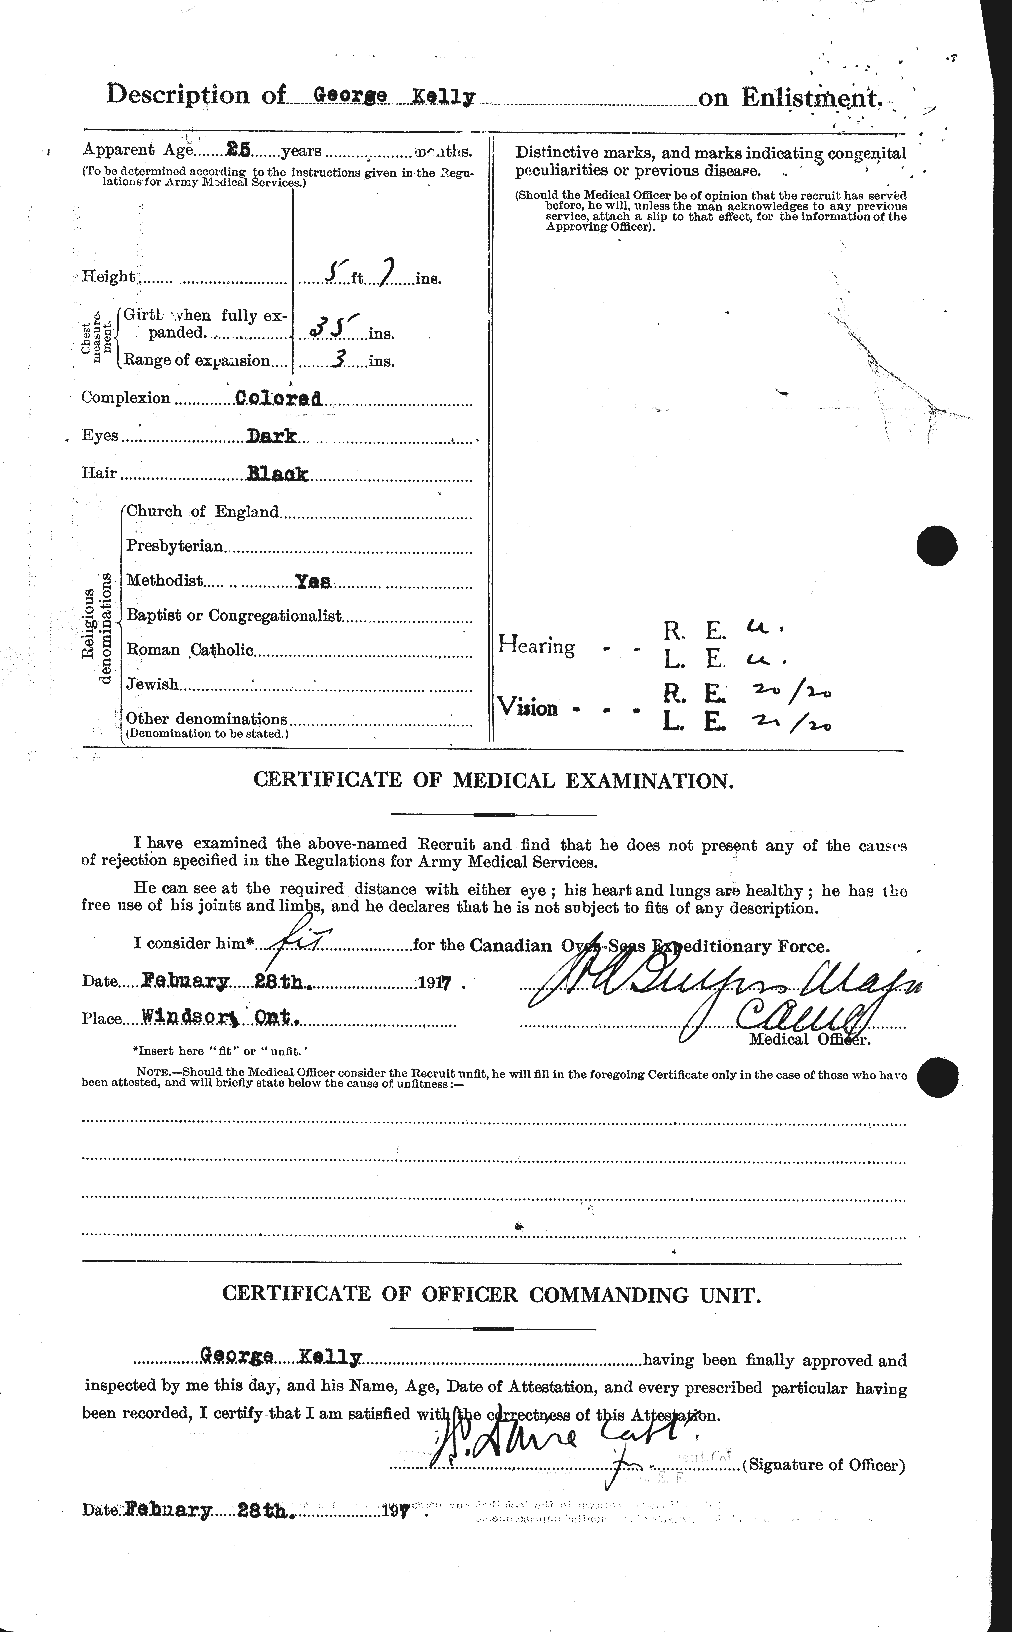 Personnel Records of the First World War - CEF 431464b